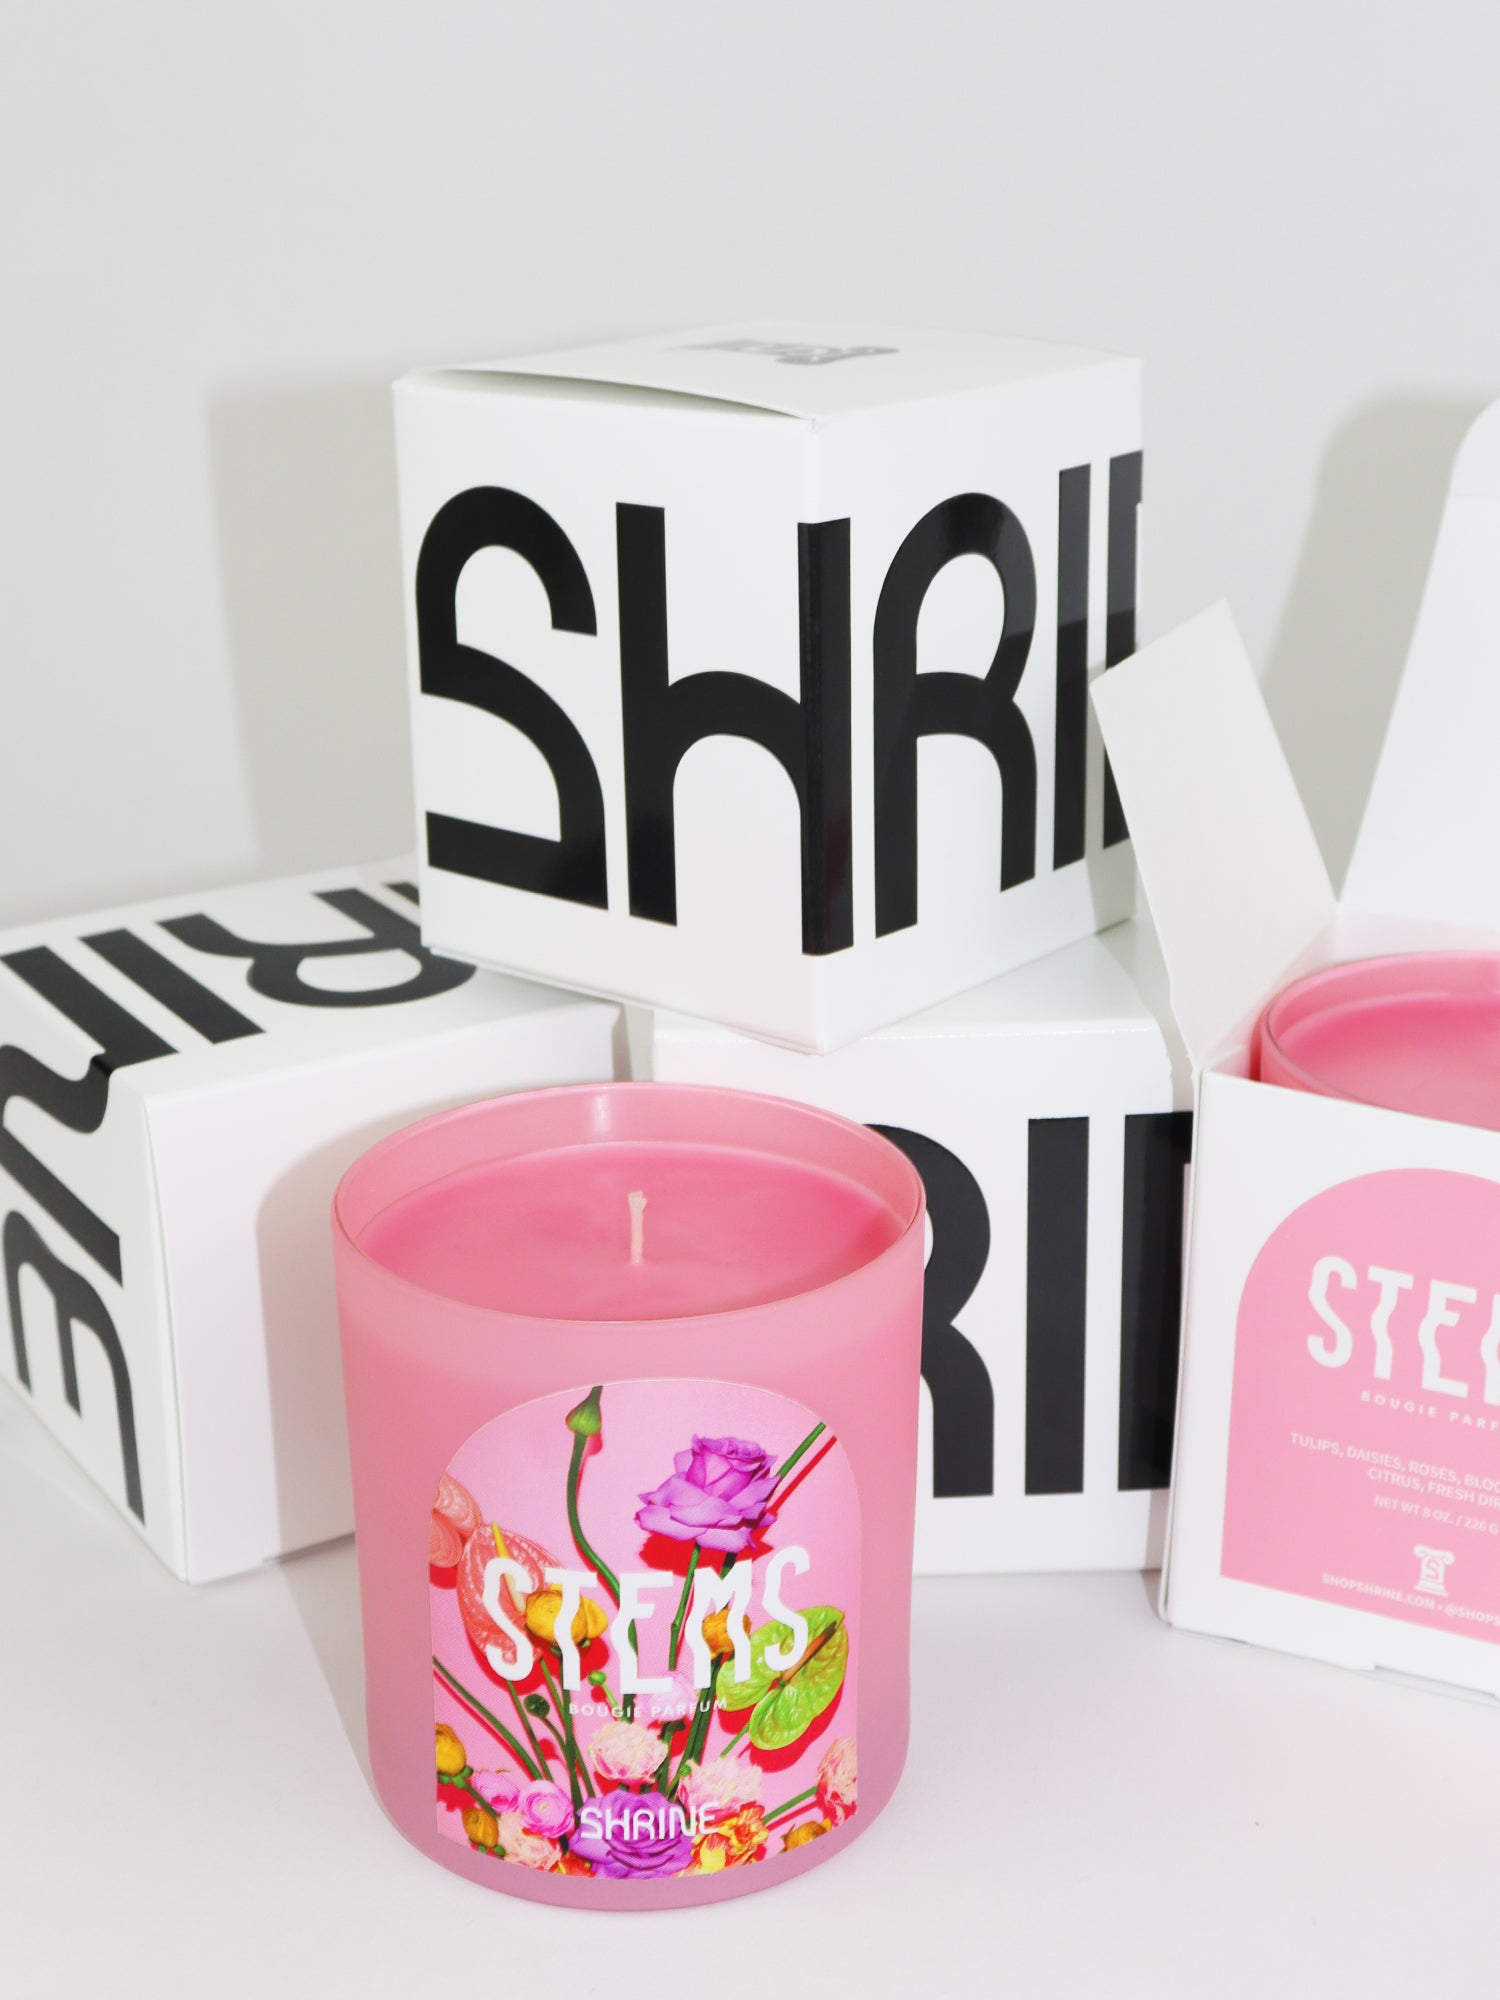 shrine stems pink floral candle with roses and anthurium flowers on the label black and white candle box shop shrine shopshrine